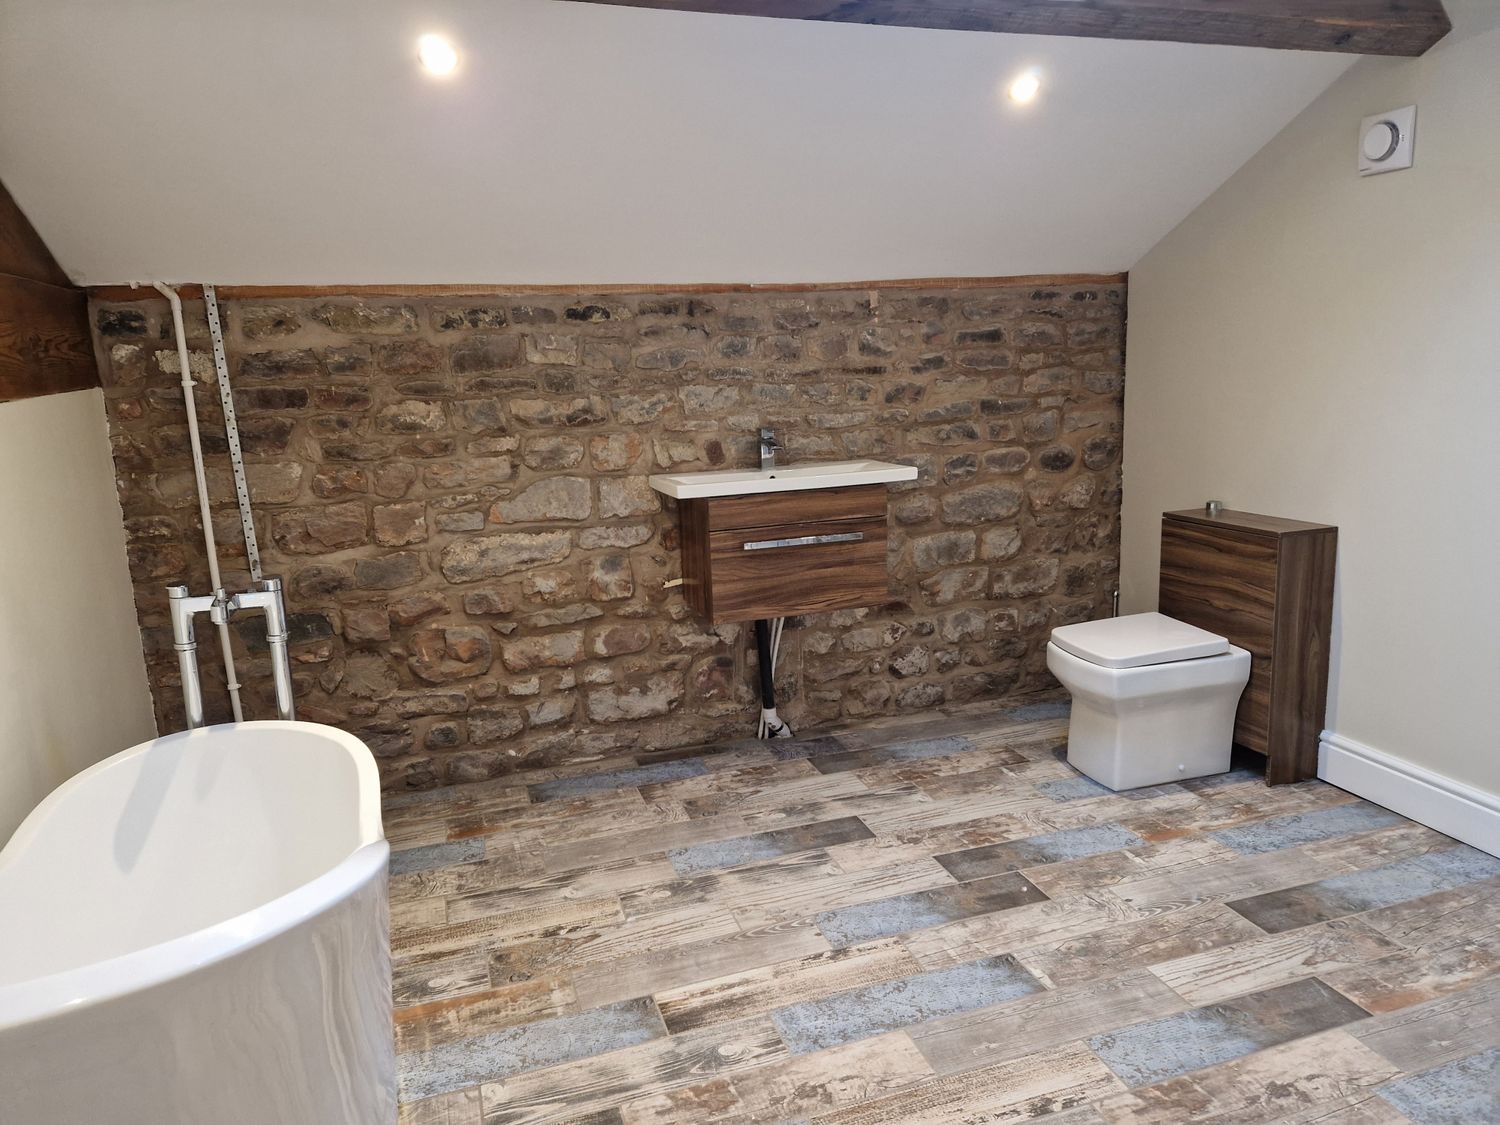 8 Coach House is near Garstang, Lancashire. Three-bedroom barn conversion with hot tub. Contemporary